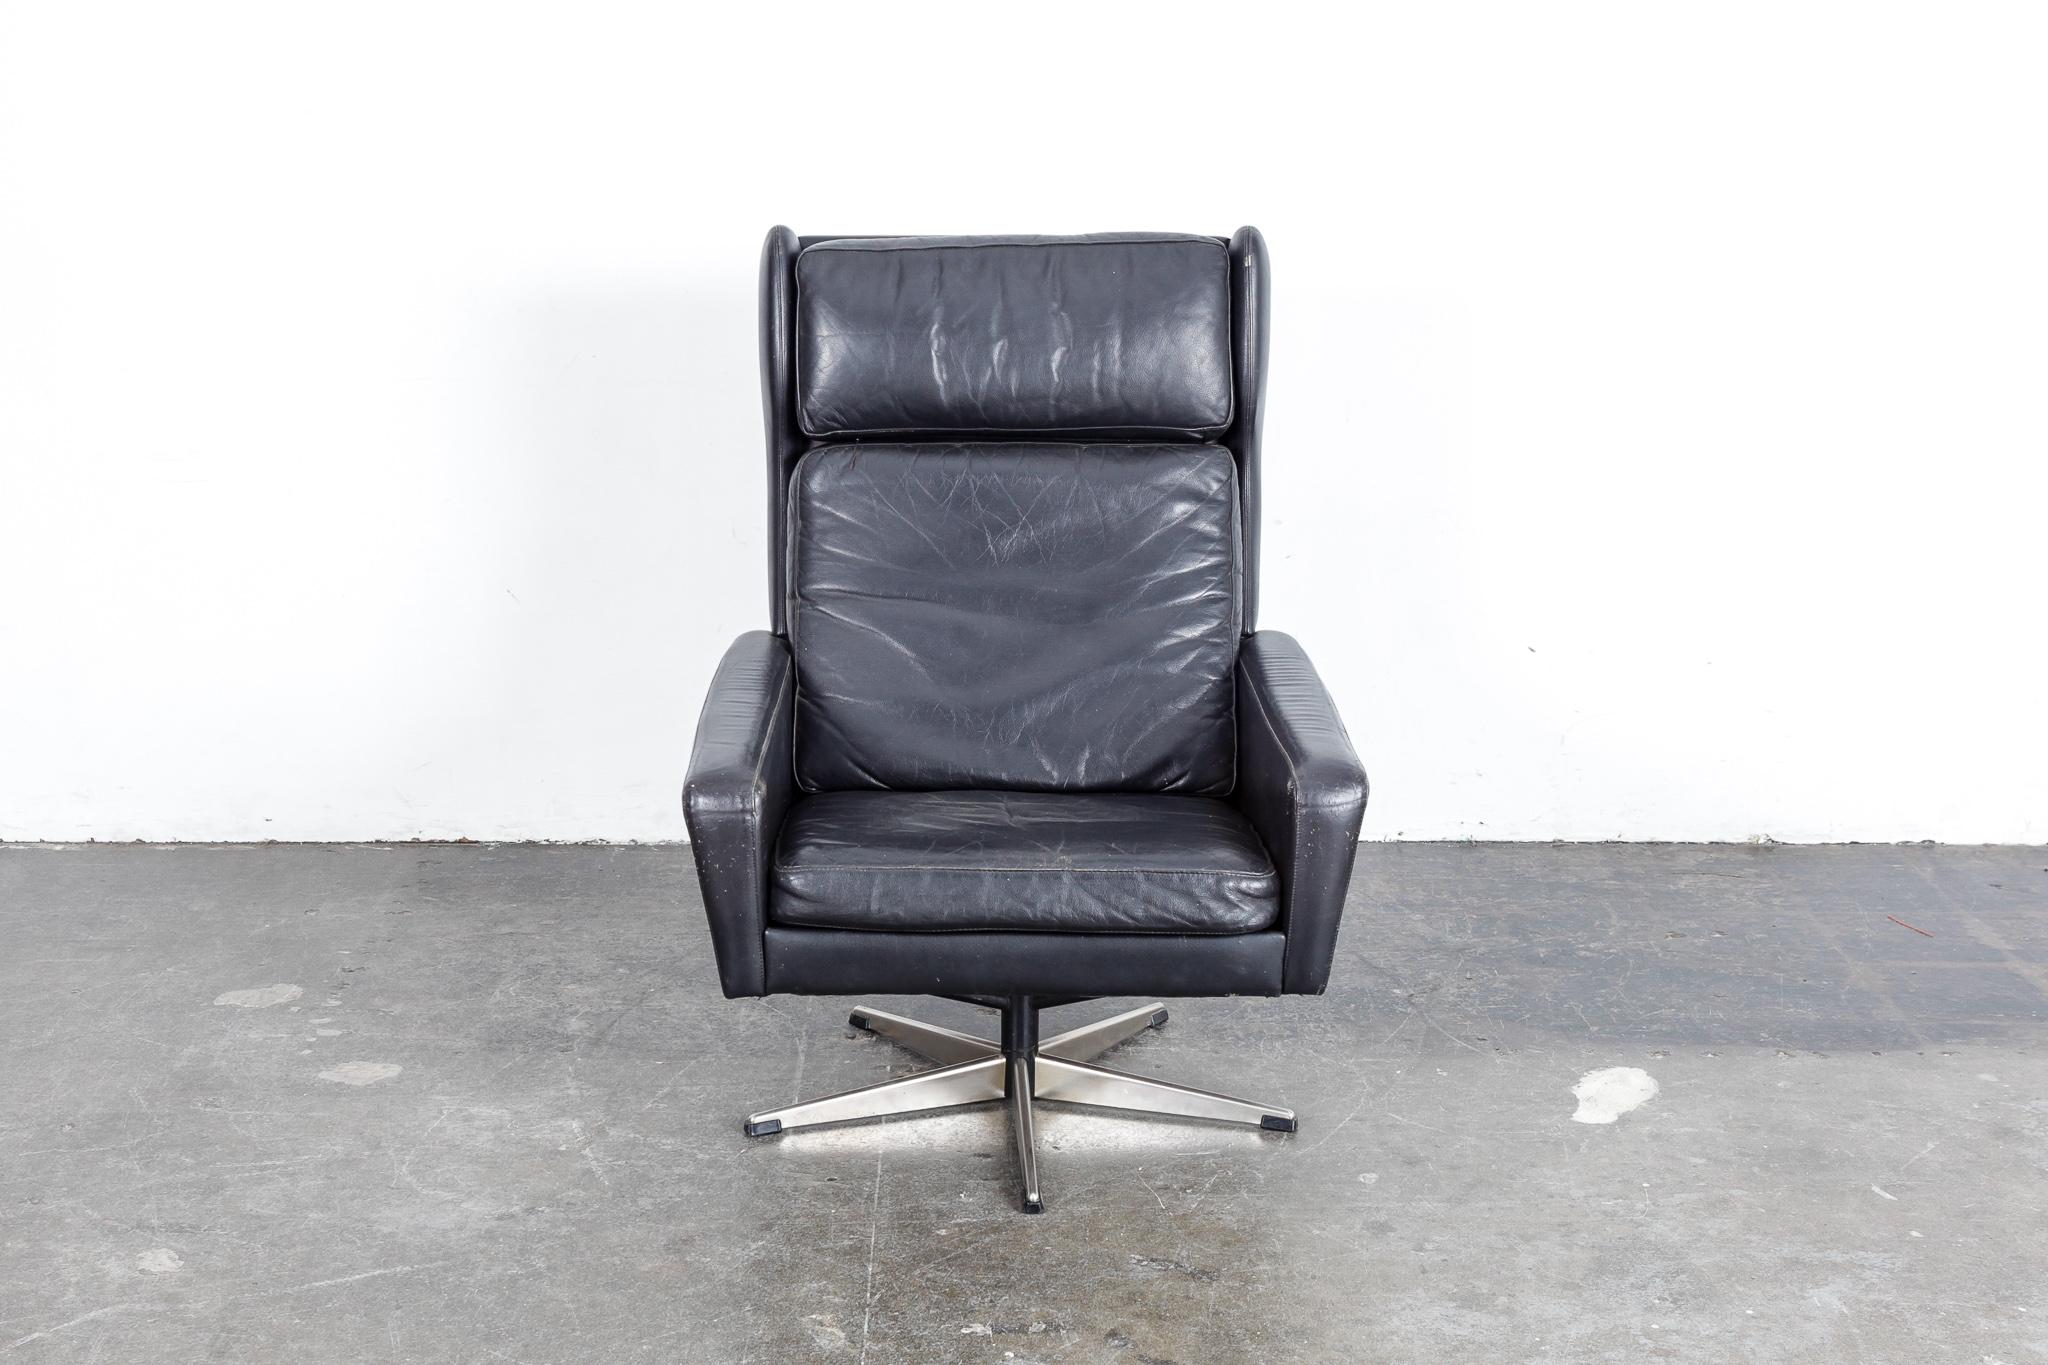 Classic Danish Mid-Century Modern original black leather swivel lounge chair, 1960s. 3 loose cushions for seat, back and head rest, in a wingback style tall chair. Leather shows patina and wear consistent with age but has no tears or gouges.